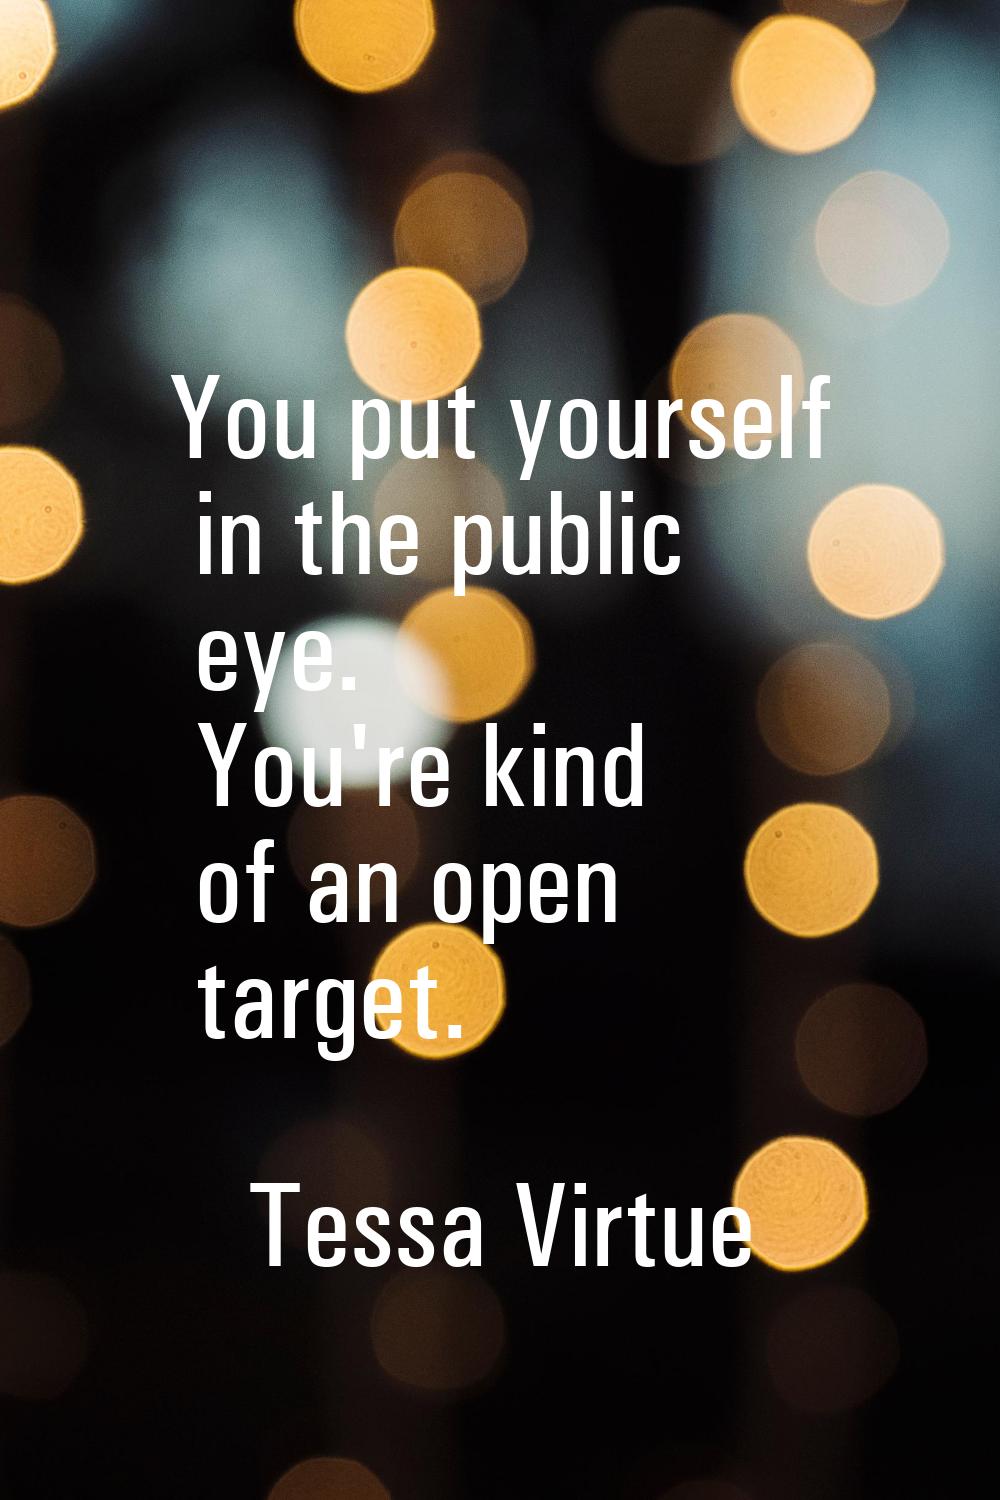 You put yourself in the public eye. You're kind of an open target.